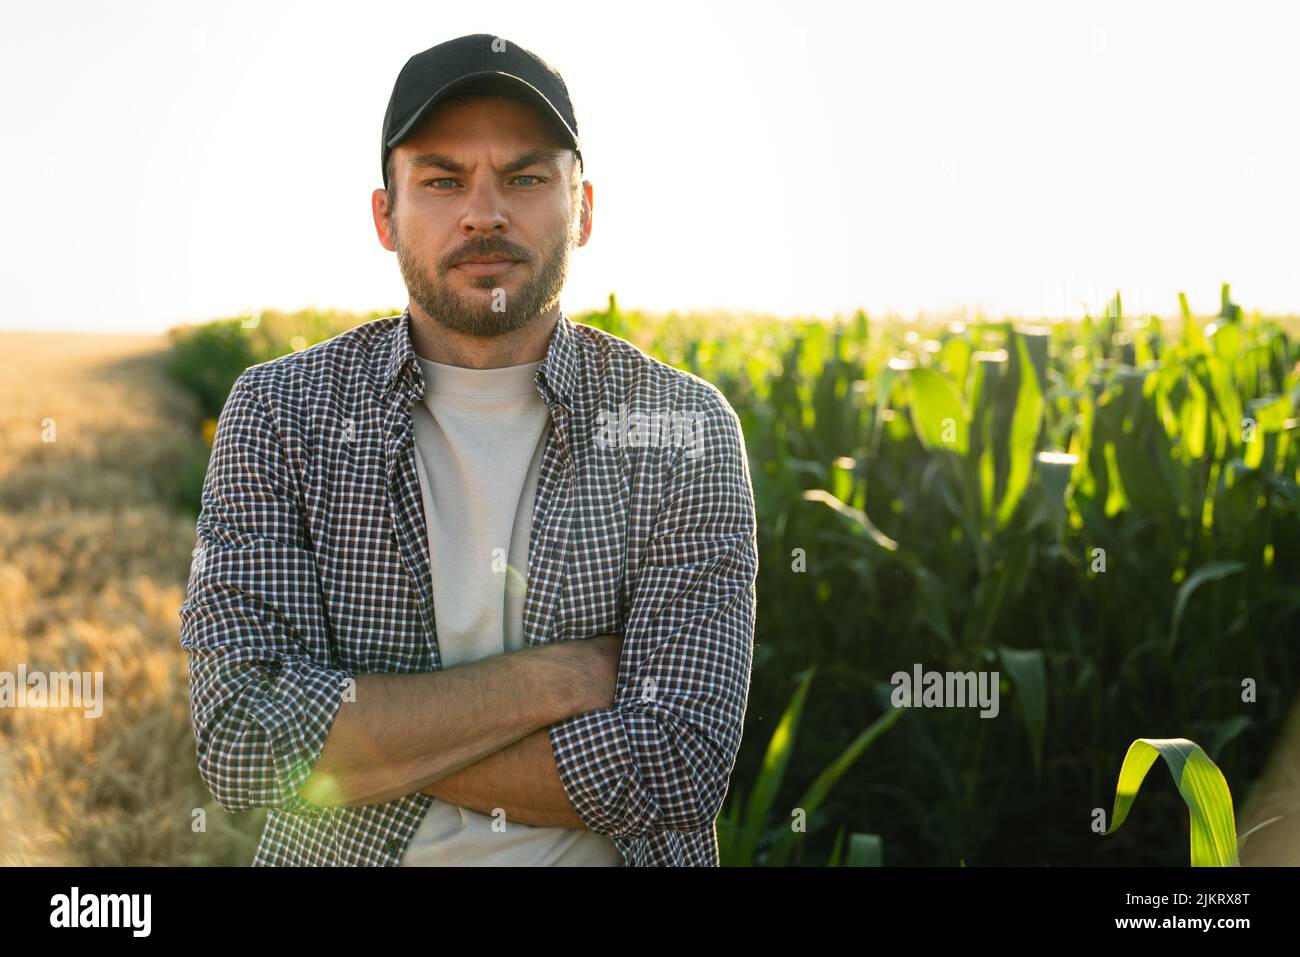 Bearded farmer in a cap and a plaid shirt against the background of a corn field  Stock Photo